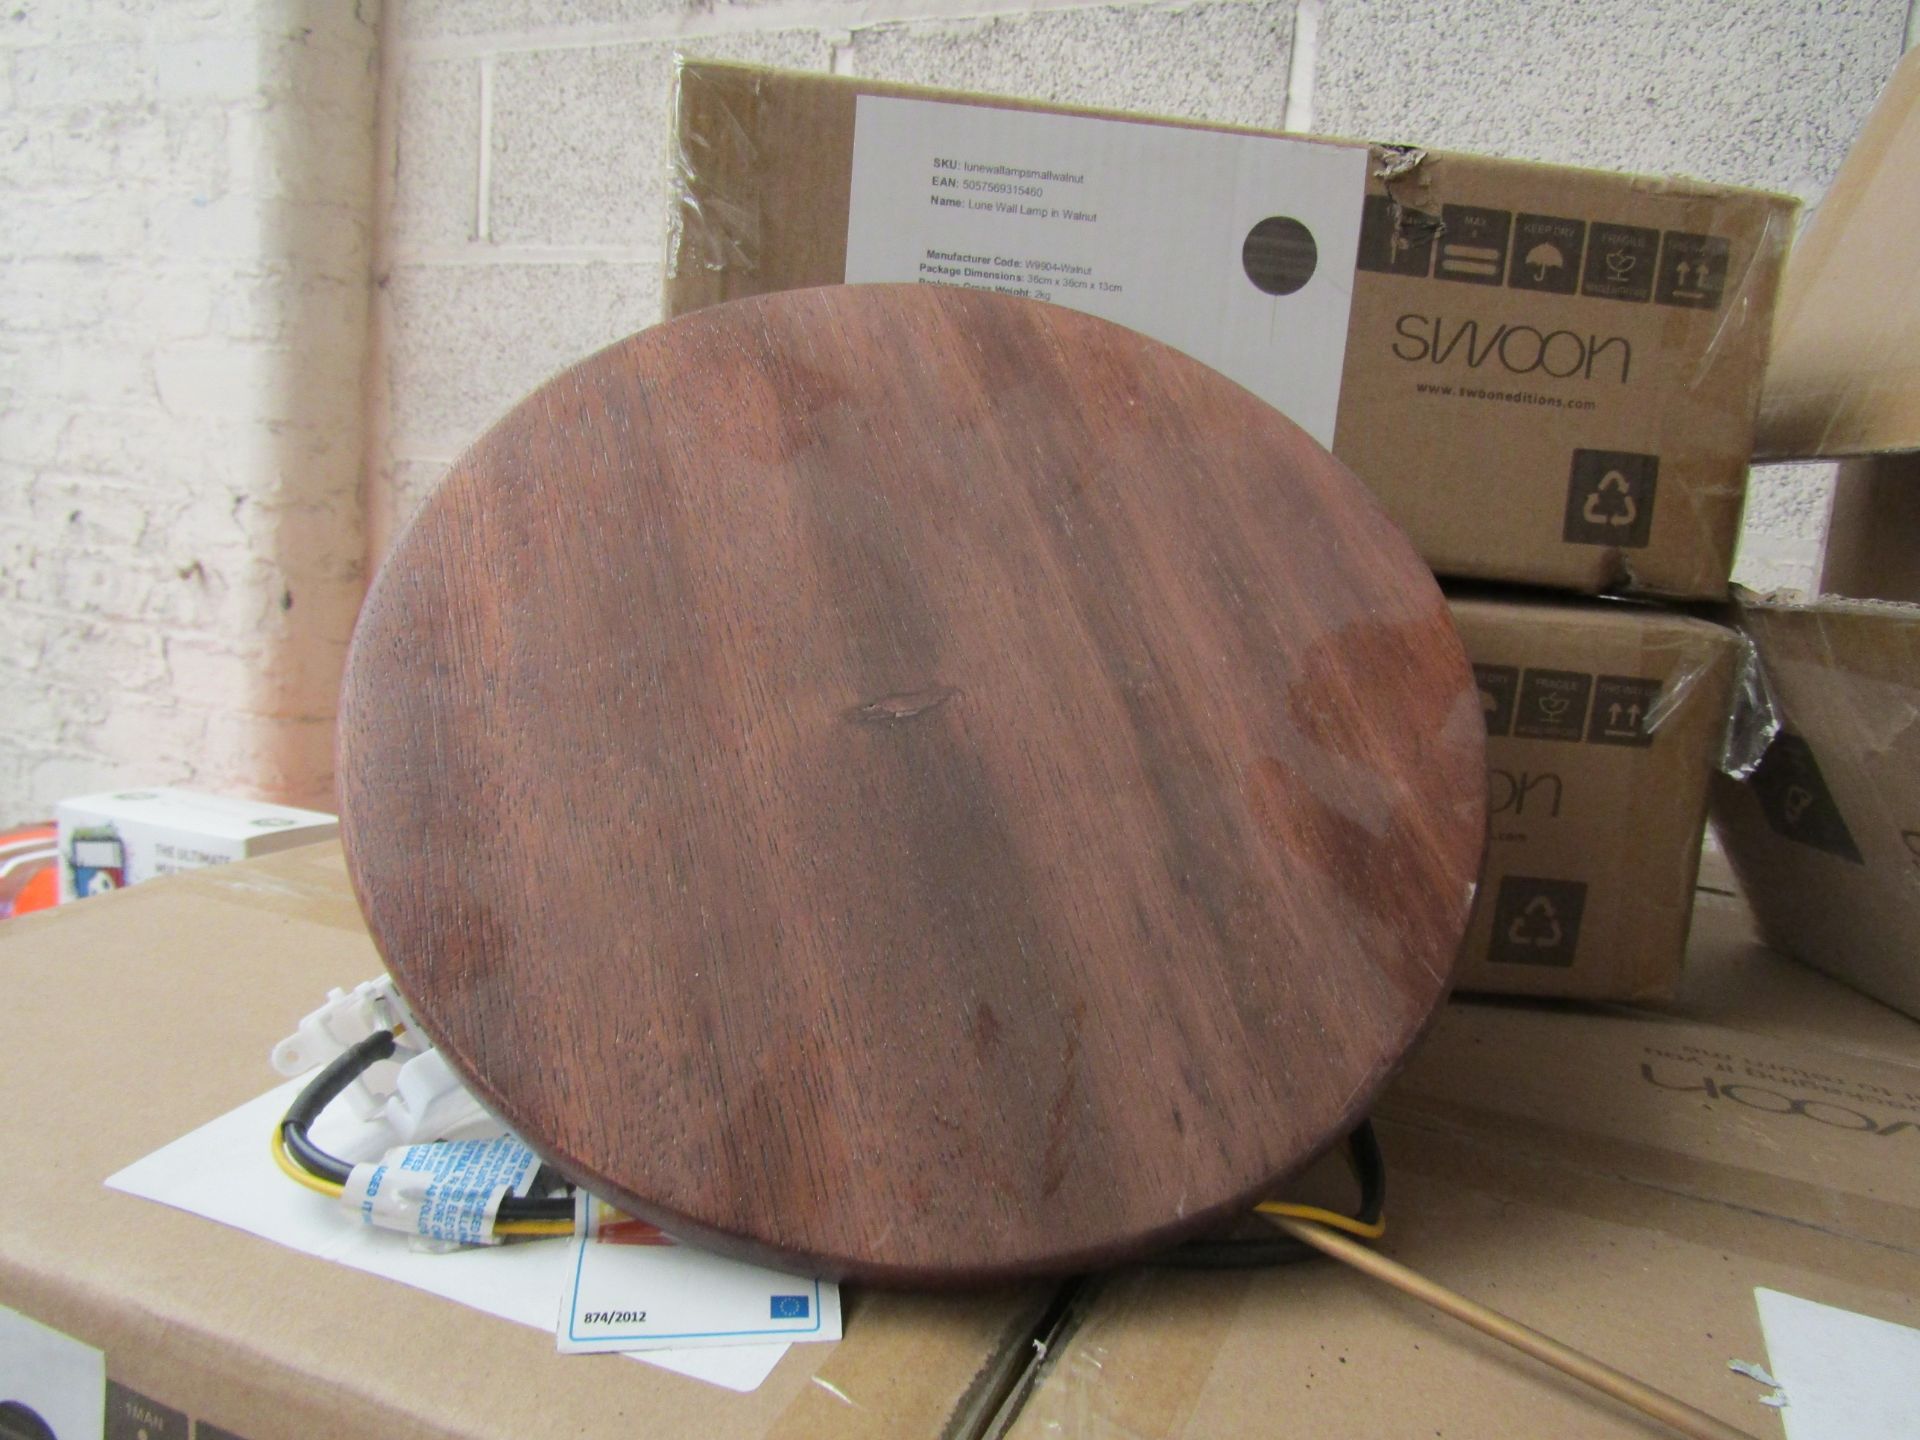 | 1X | SWOON LUNE WALL LIGHT IN WALNUT | LOOKS UNUSED AND BOXED | RRP £79 |